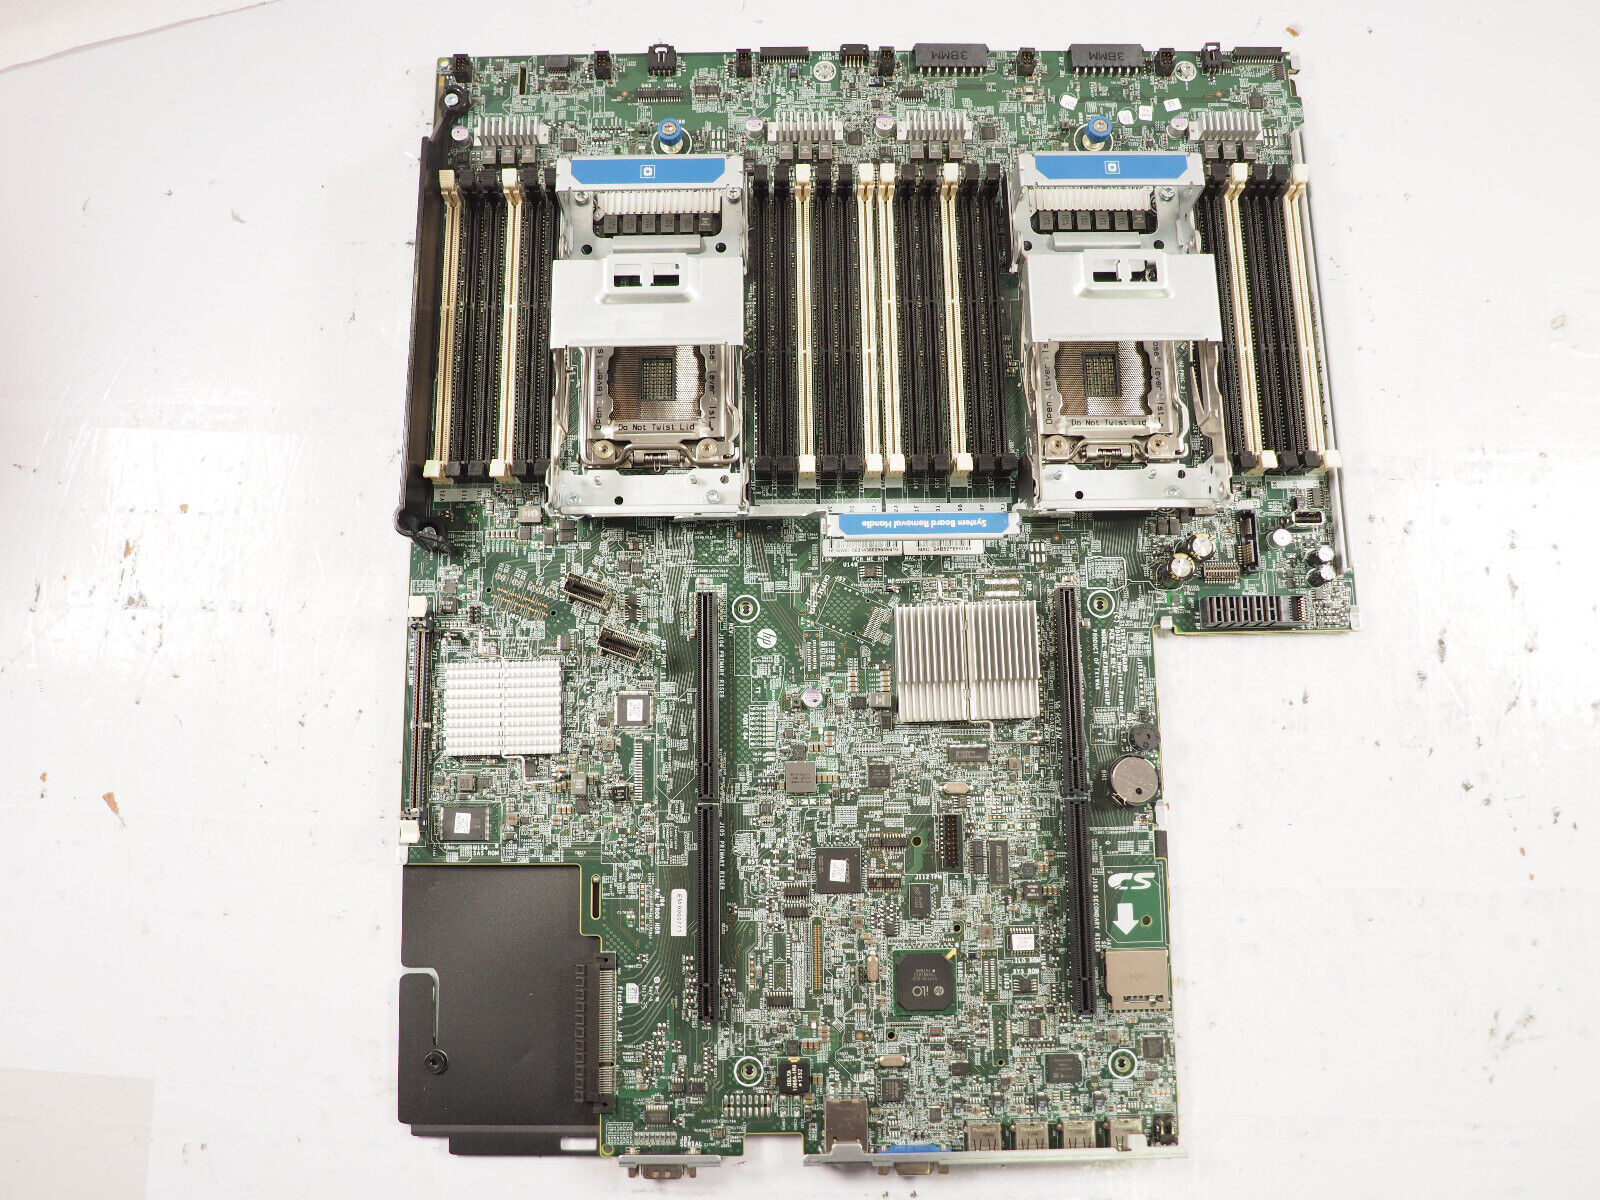 HP FXNESSN-001P System Board DL380P 732143-001 622217-002 732144-001 680188-002